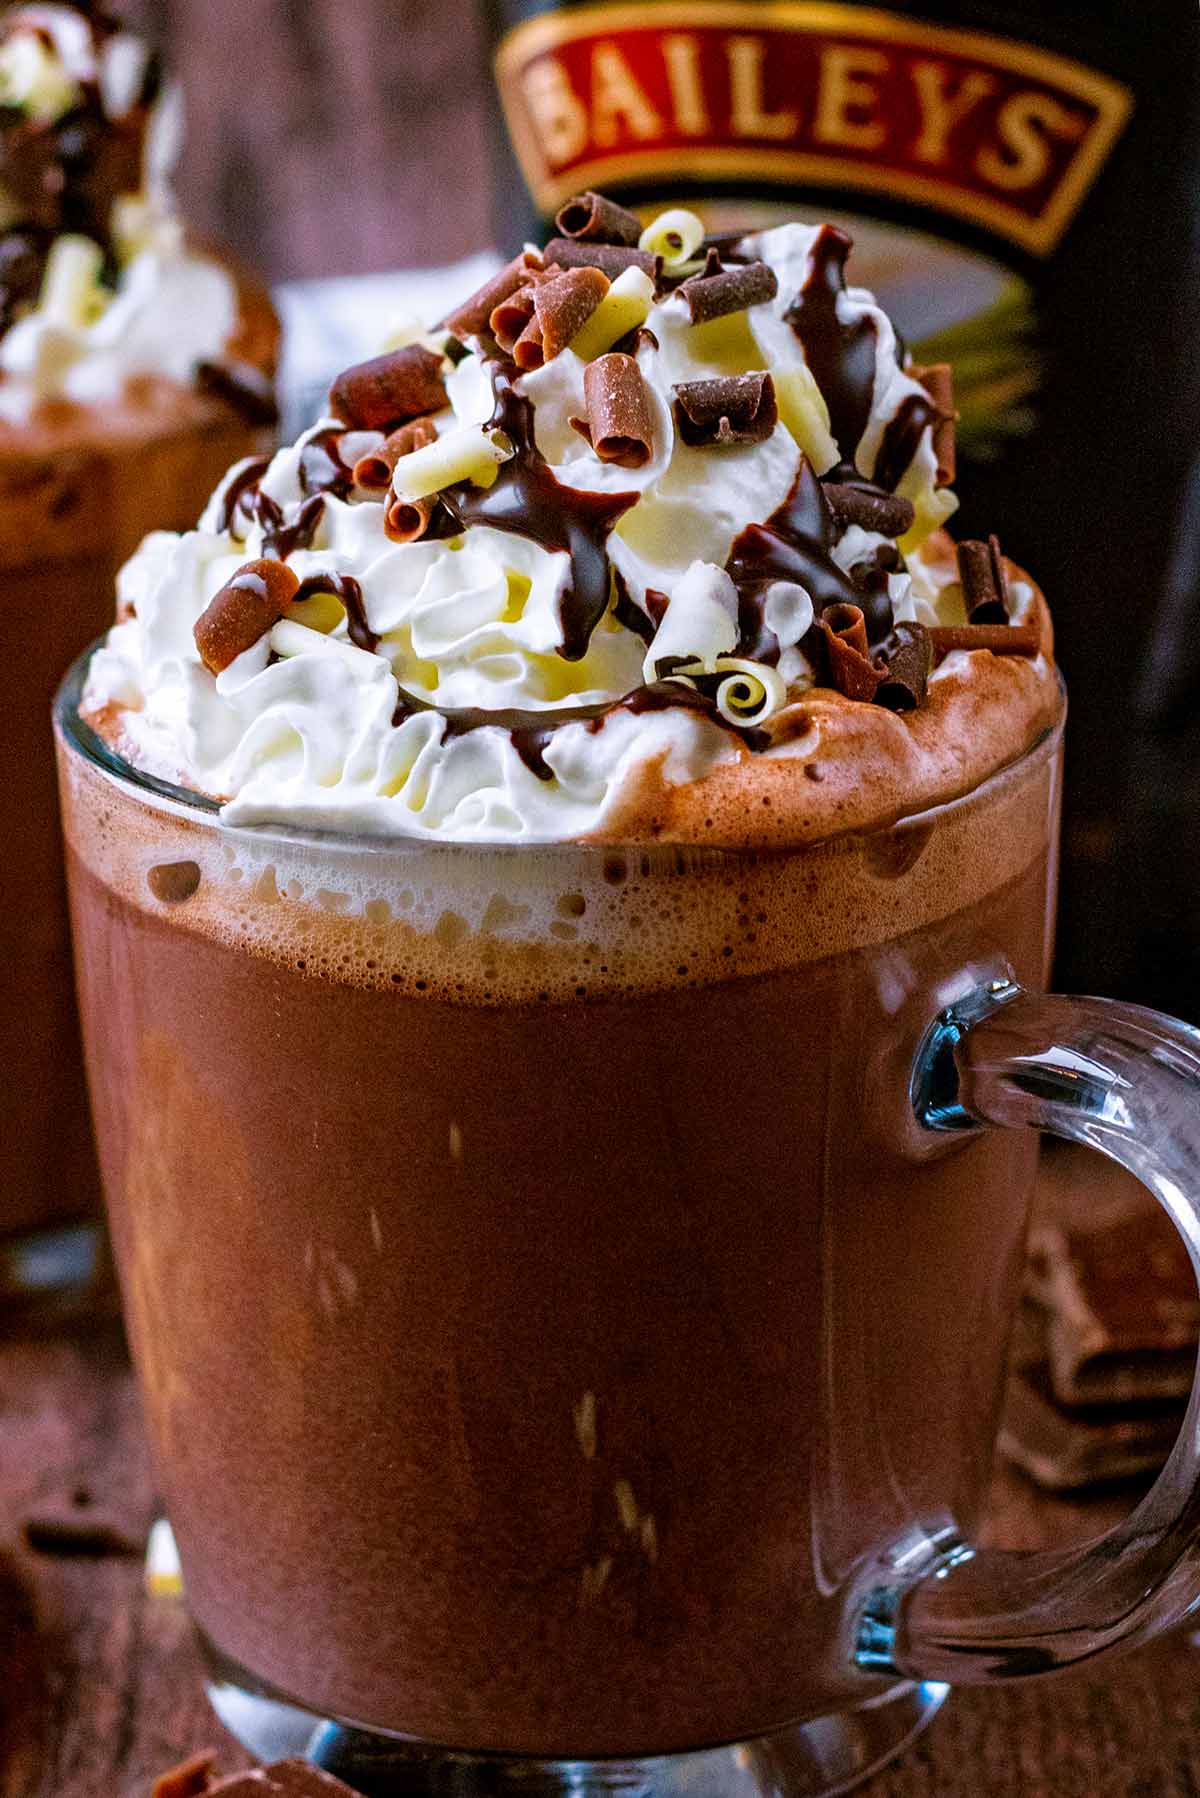 Hot chocolate topped with whipped cream, chocolate sauce and chocolate curls.